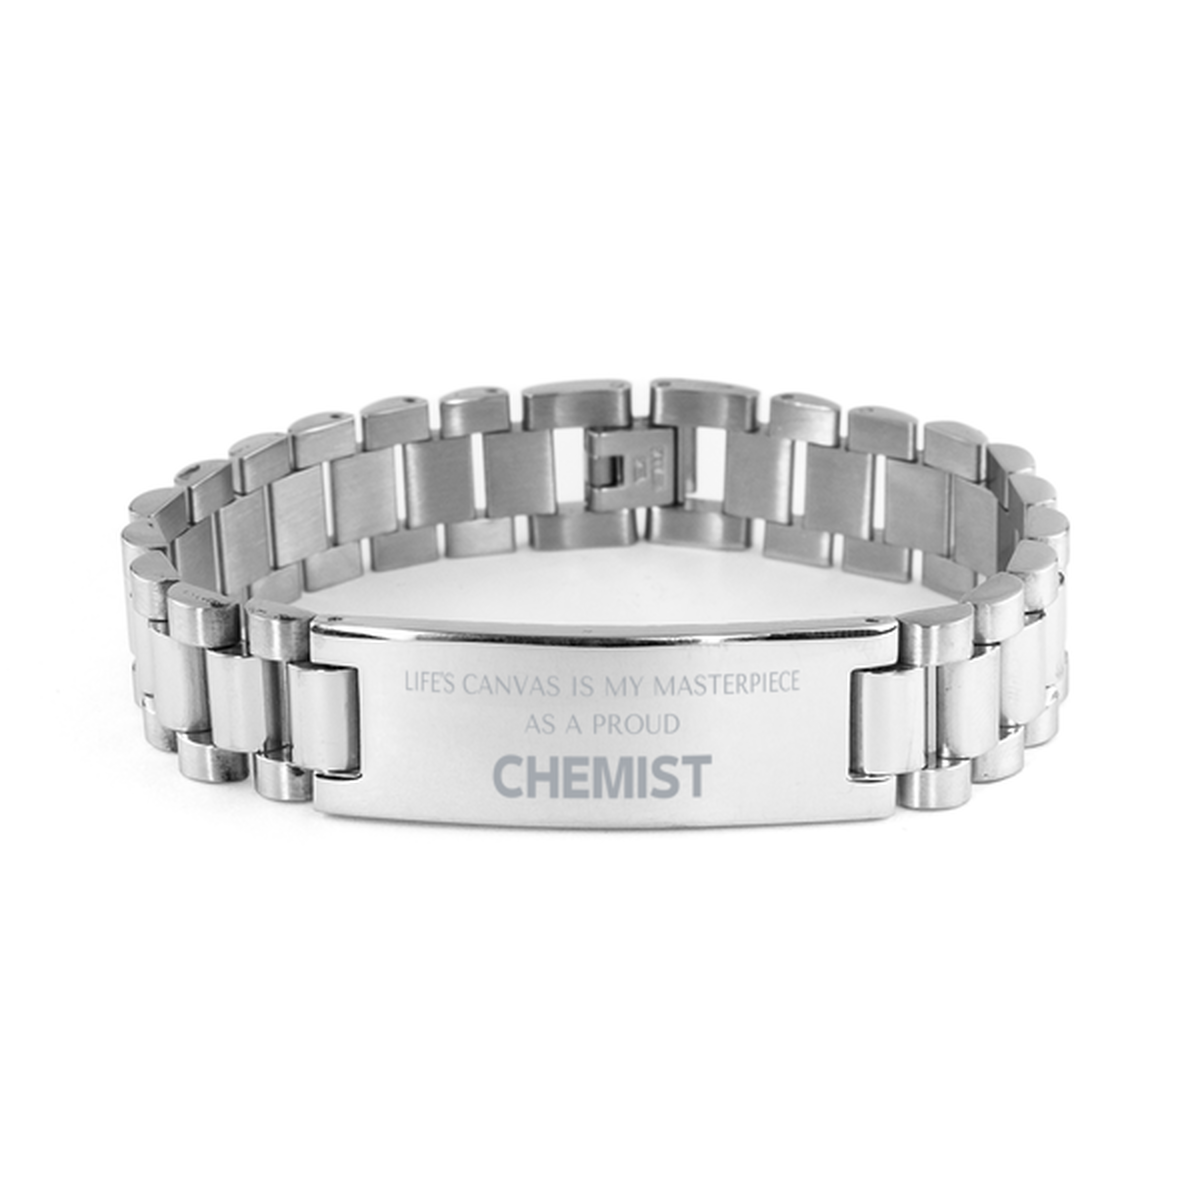 Proud Chemist Gifts, Life's canvas is my masterpiece, Epic Birthday Christmas Unique Ladder Stainless Steel Bracelet For Chemist, Coworkers, Men, Women, Friends